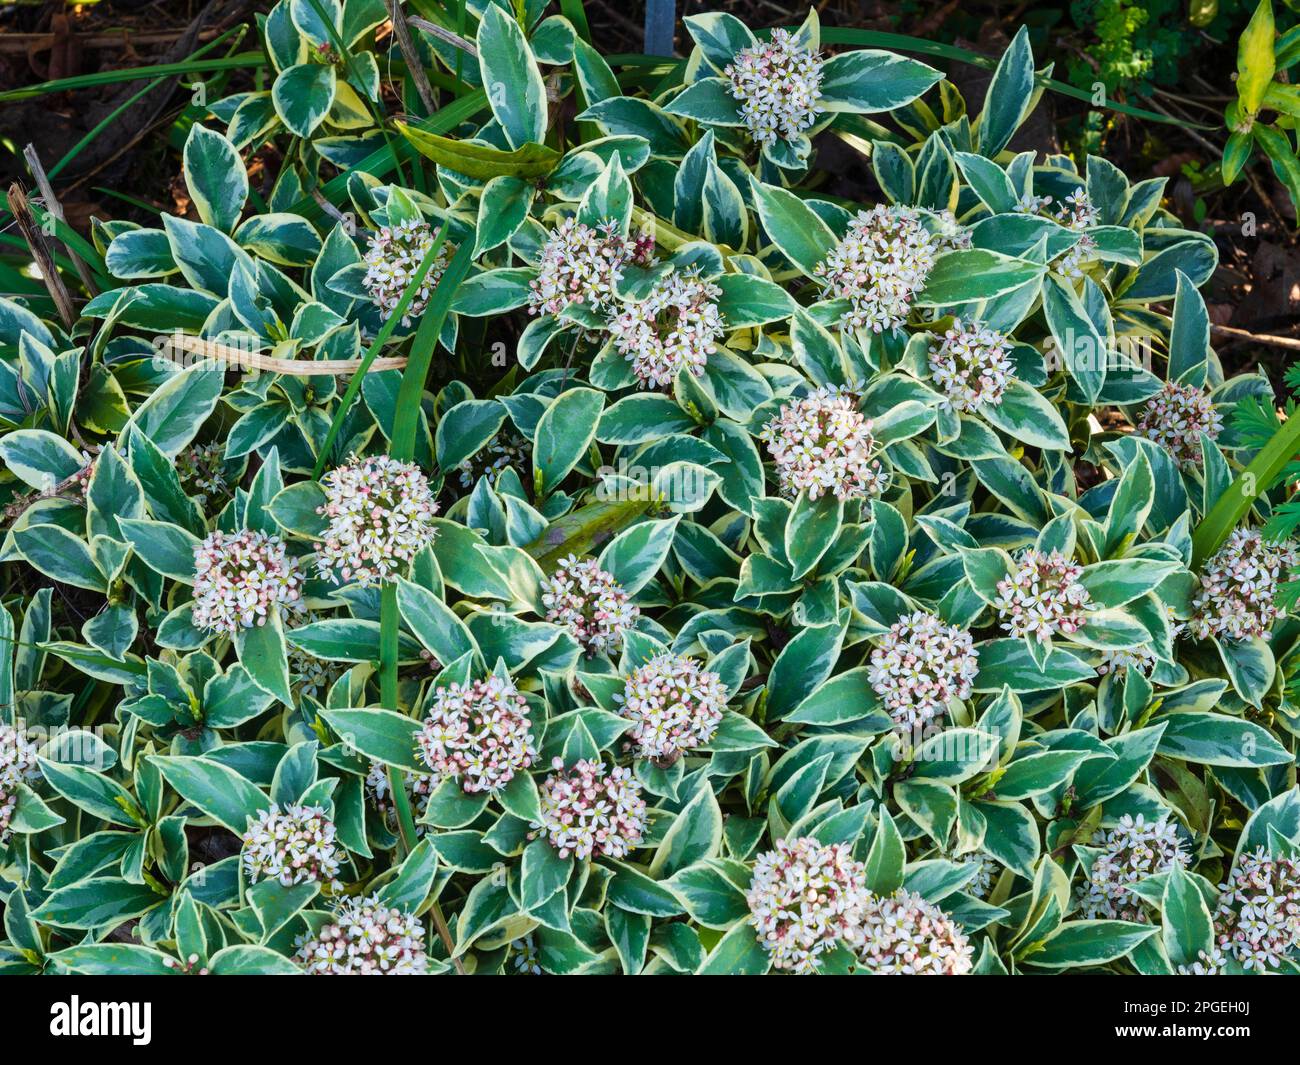 Variegated evergreen foliage and scented white spring flowers of the compact hardy evergreen shrub, Skimmia japonica 'Magic Marlot' Stock Photo